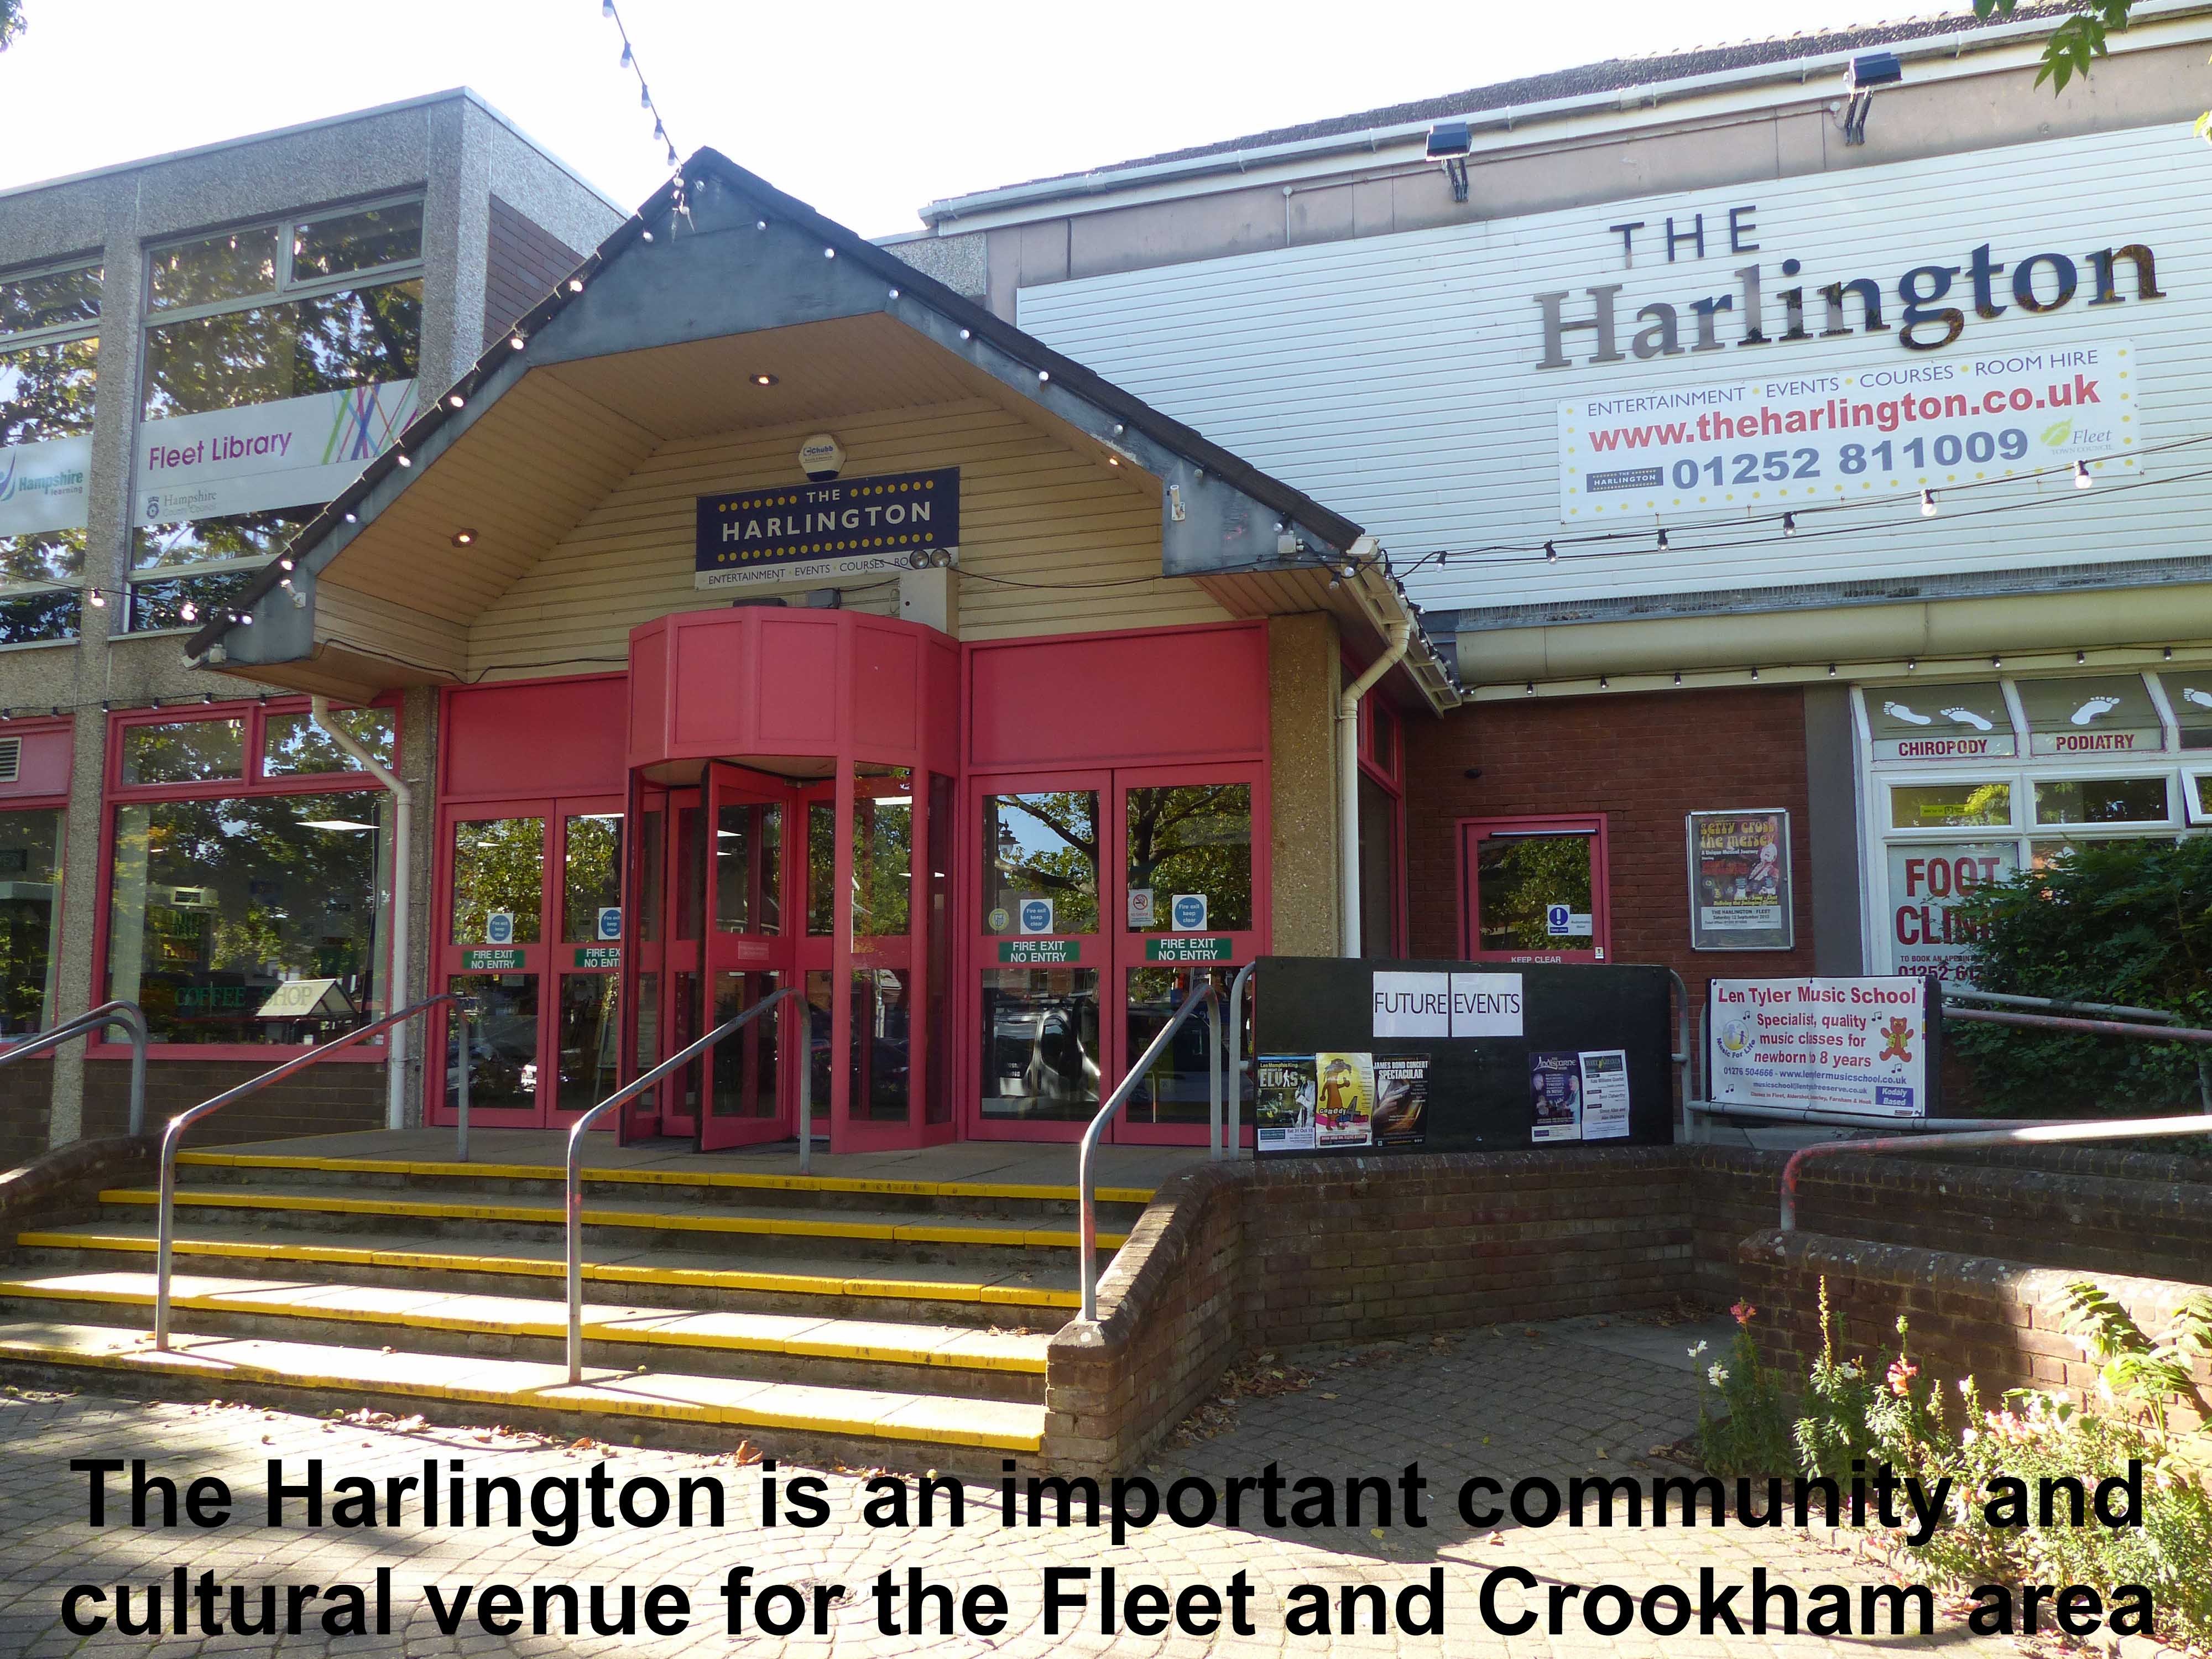 The Harlington is an important community and cultural venue for the Fleet and Crookham area